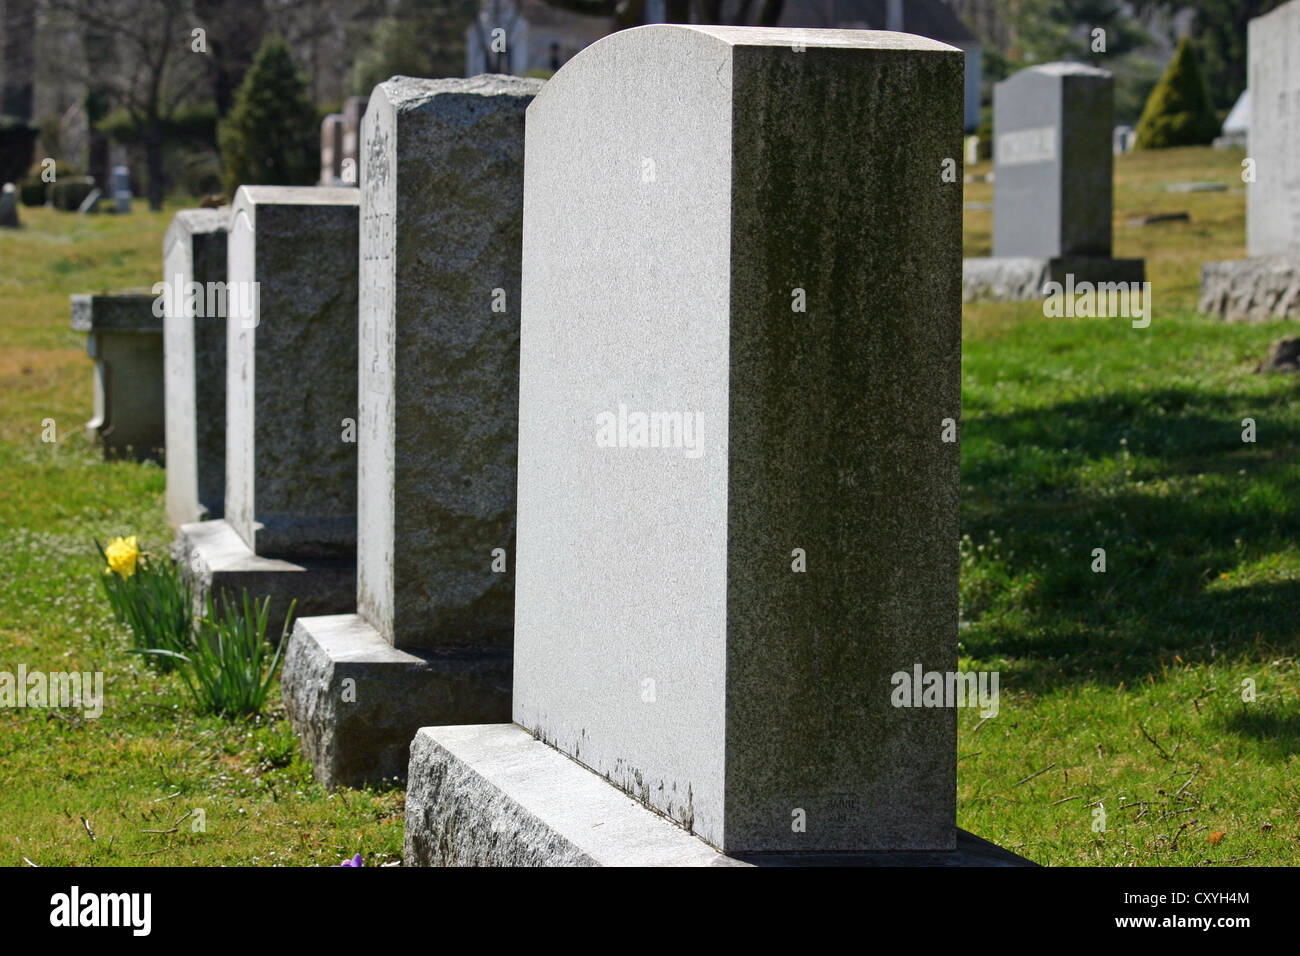 Headstones in a cemetery in New Jersey Stock Photo